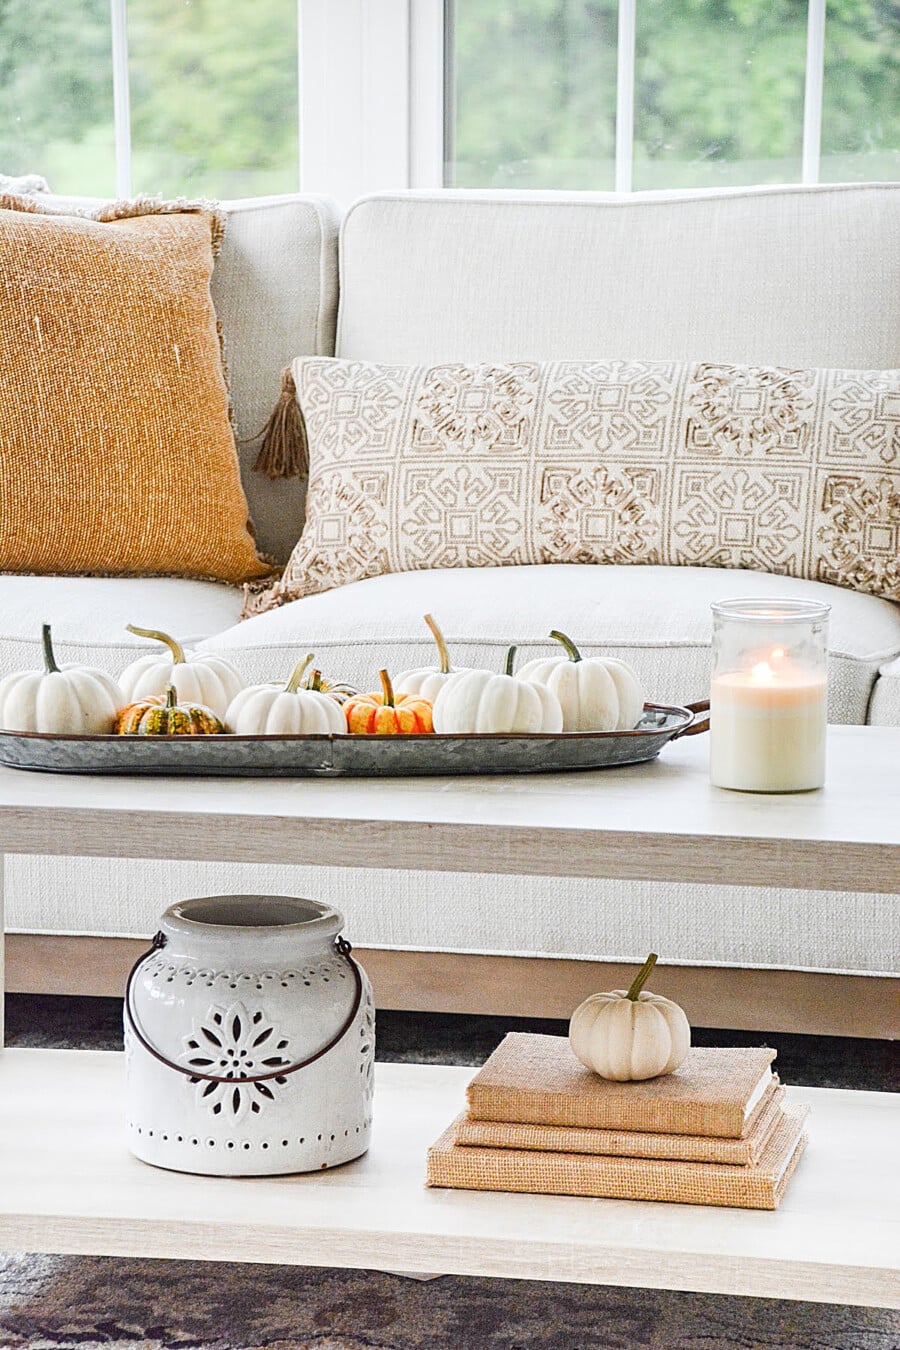 11 Smart and Inexpensive Fall Decorating Ideas